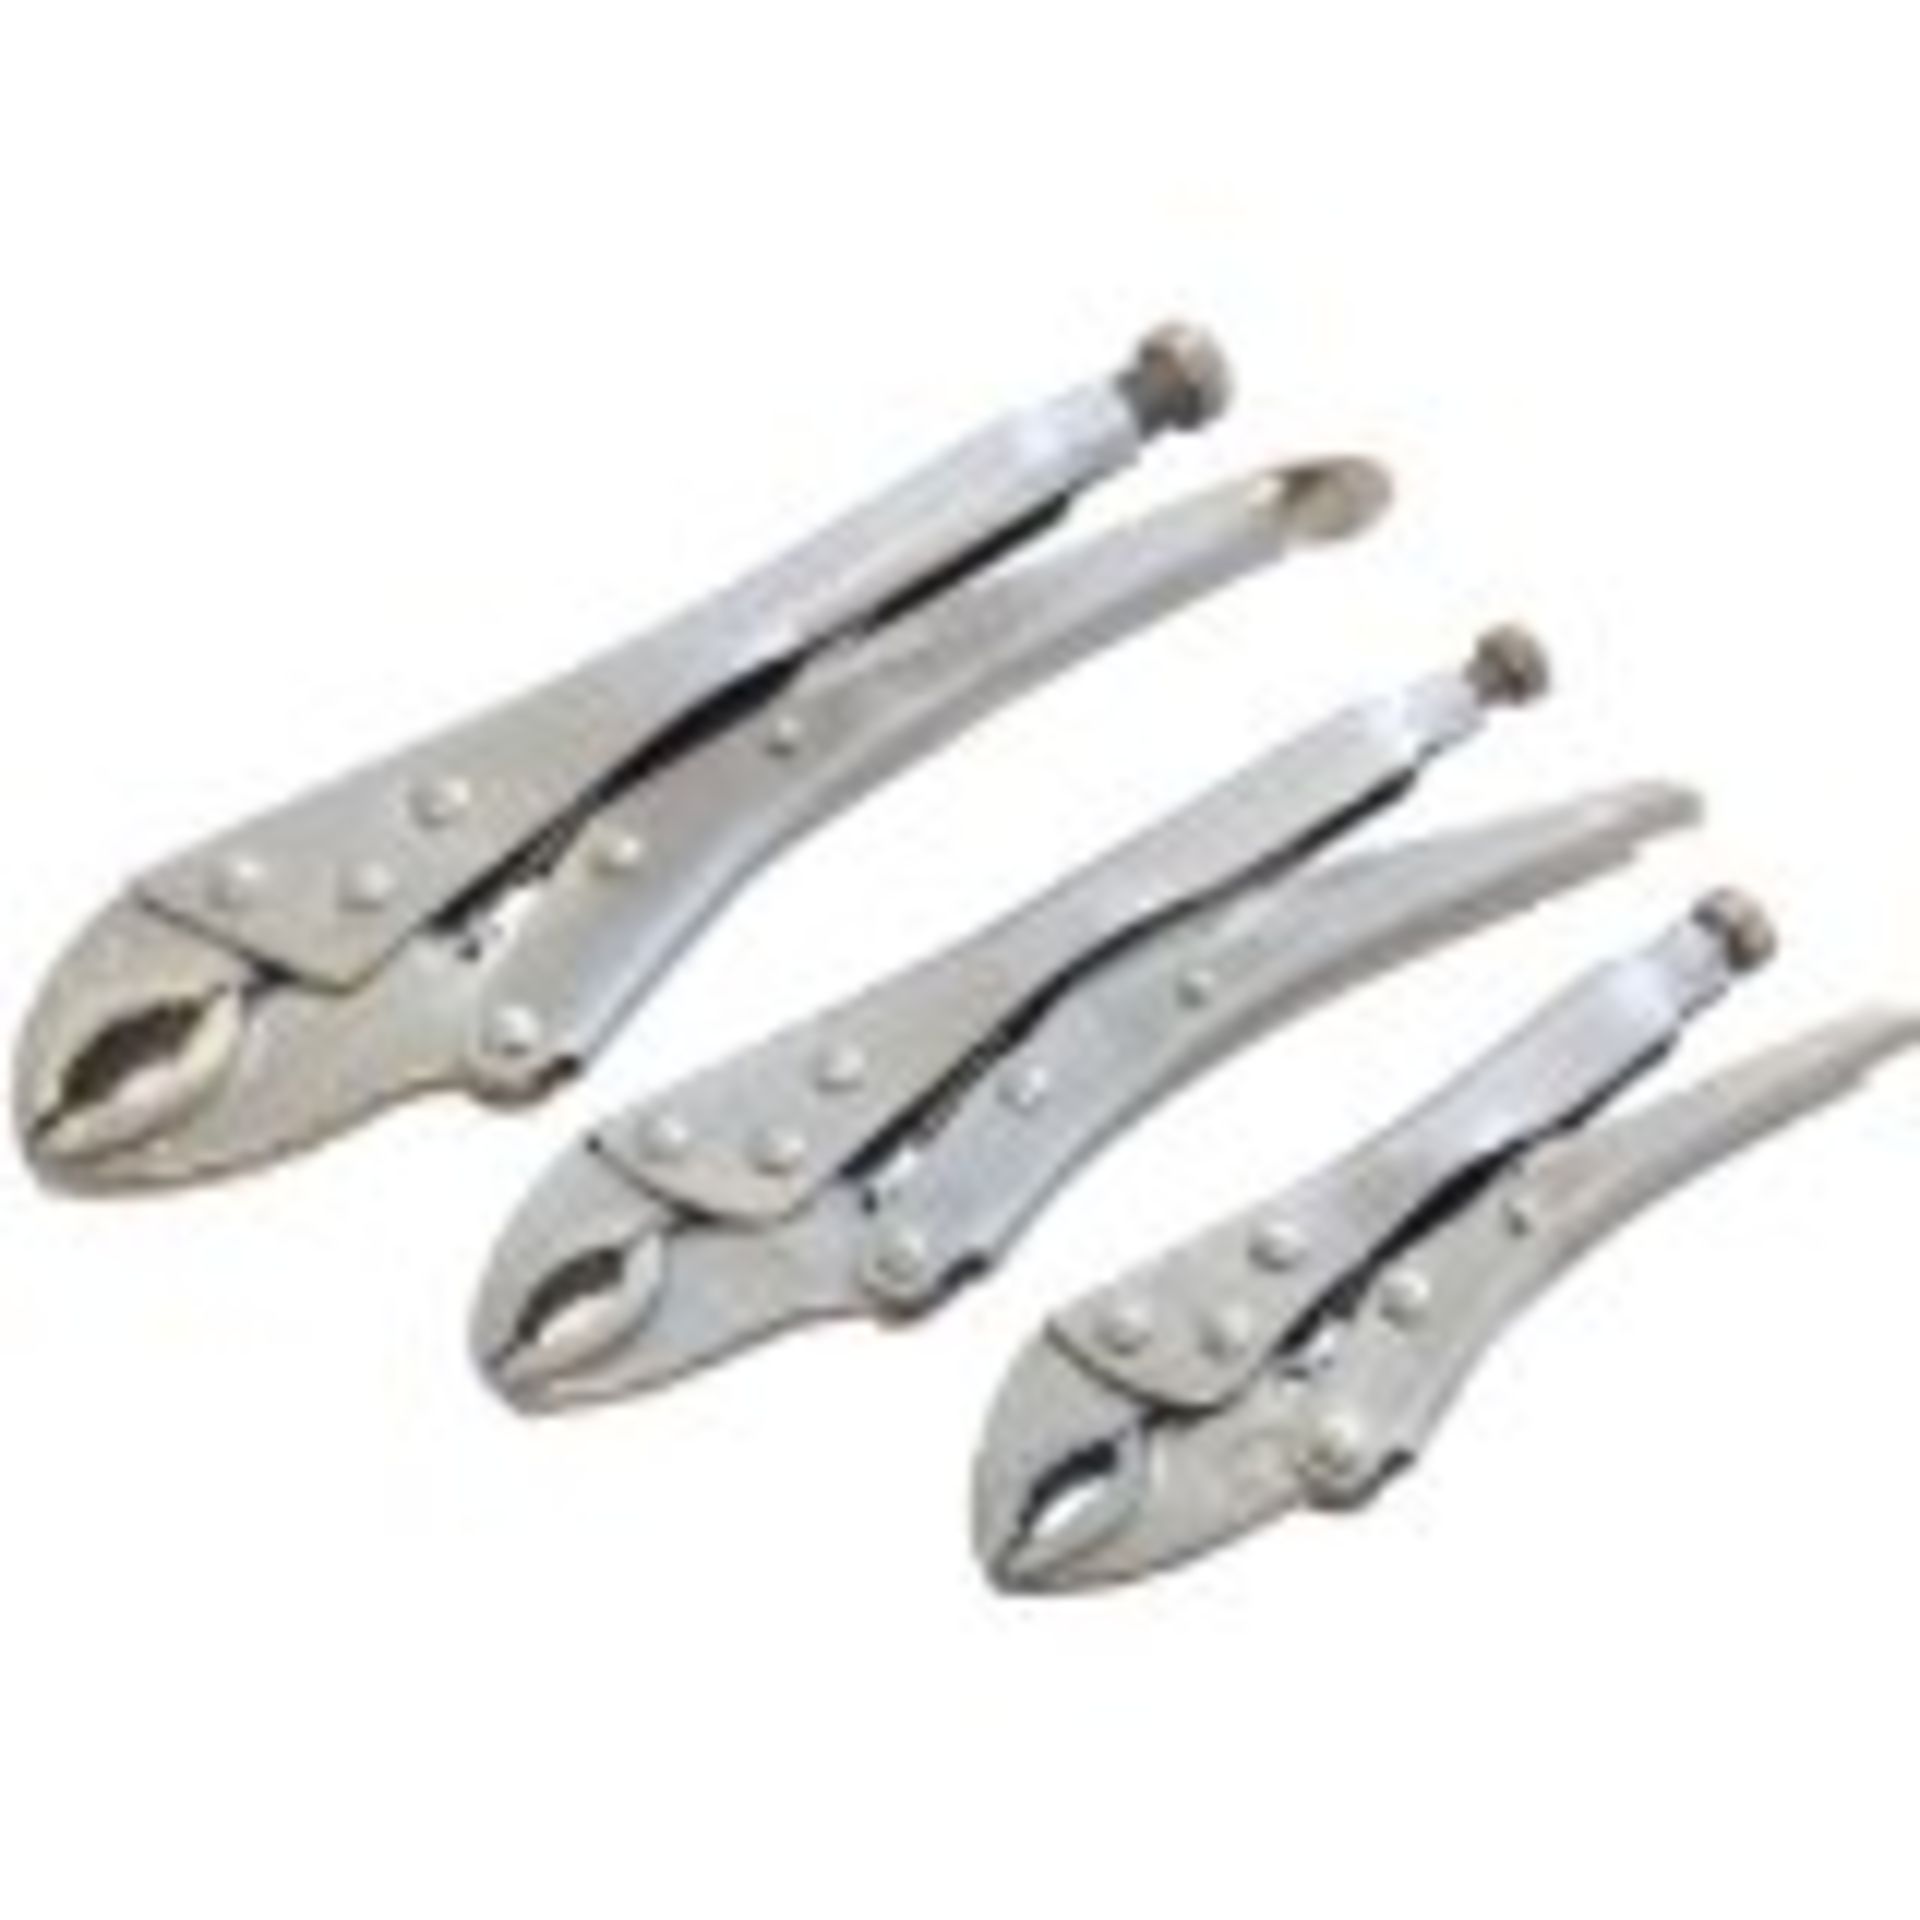 V Brand New Three Piece Locking Plier Set X 2 YOUR BID PRICE TO BE MULTIPLIED BY TWO